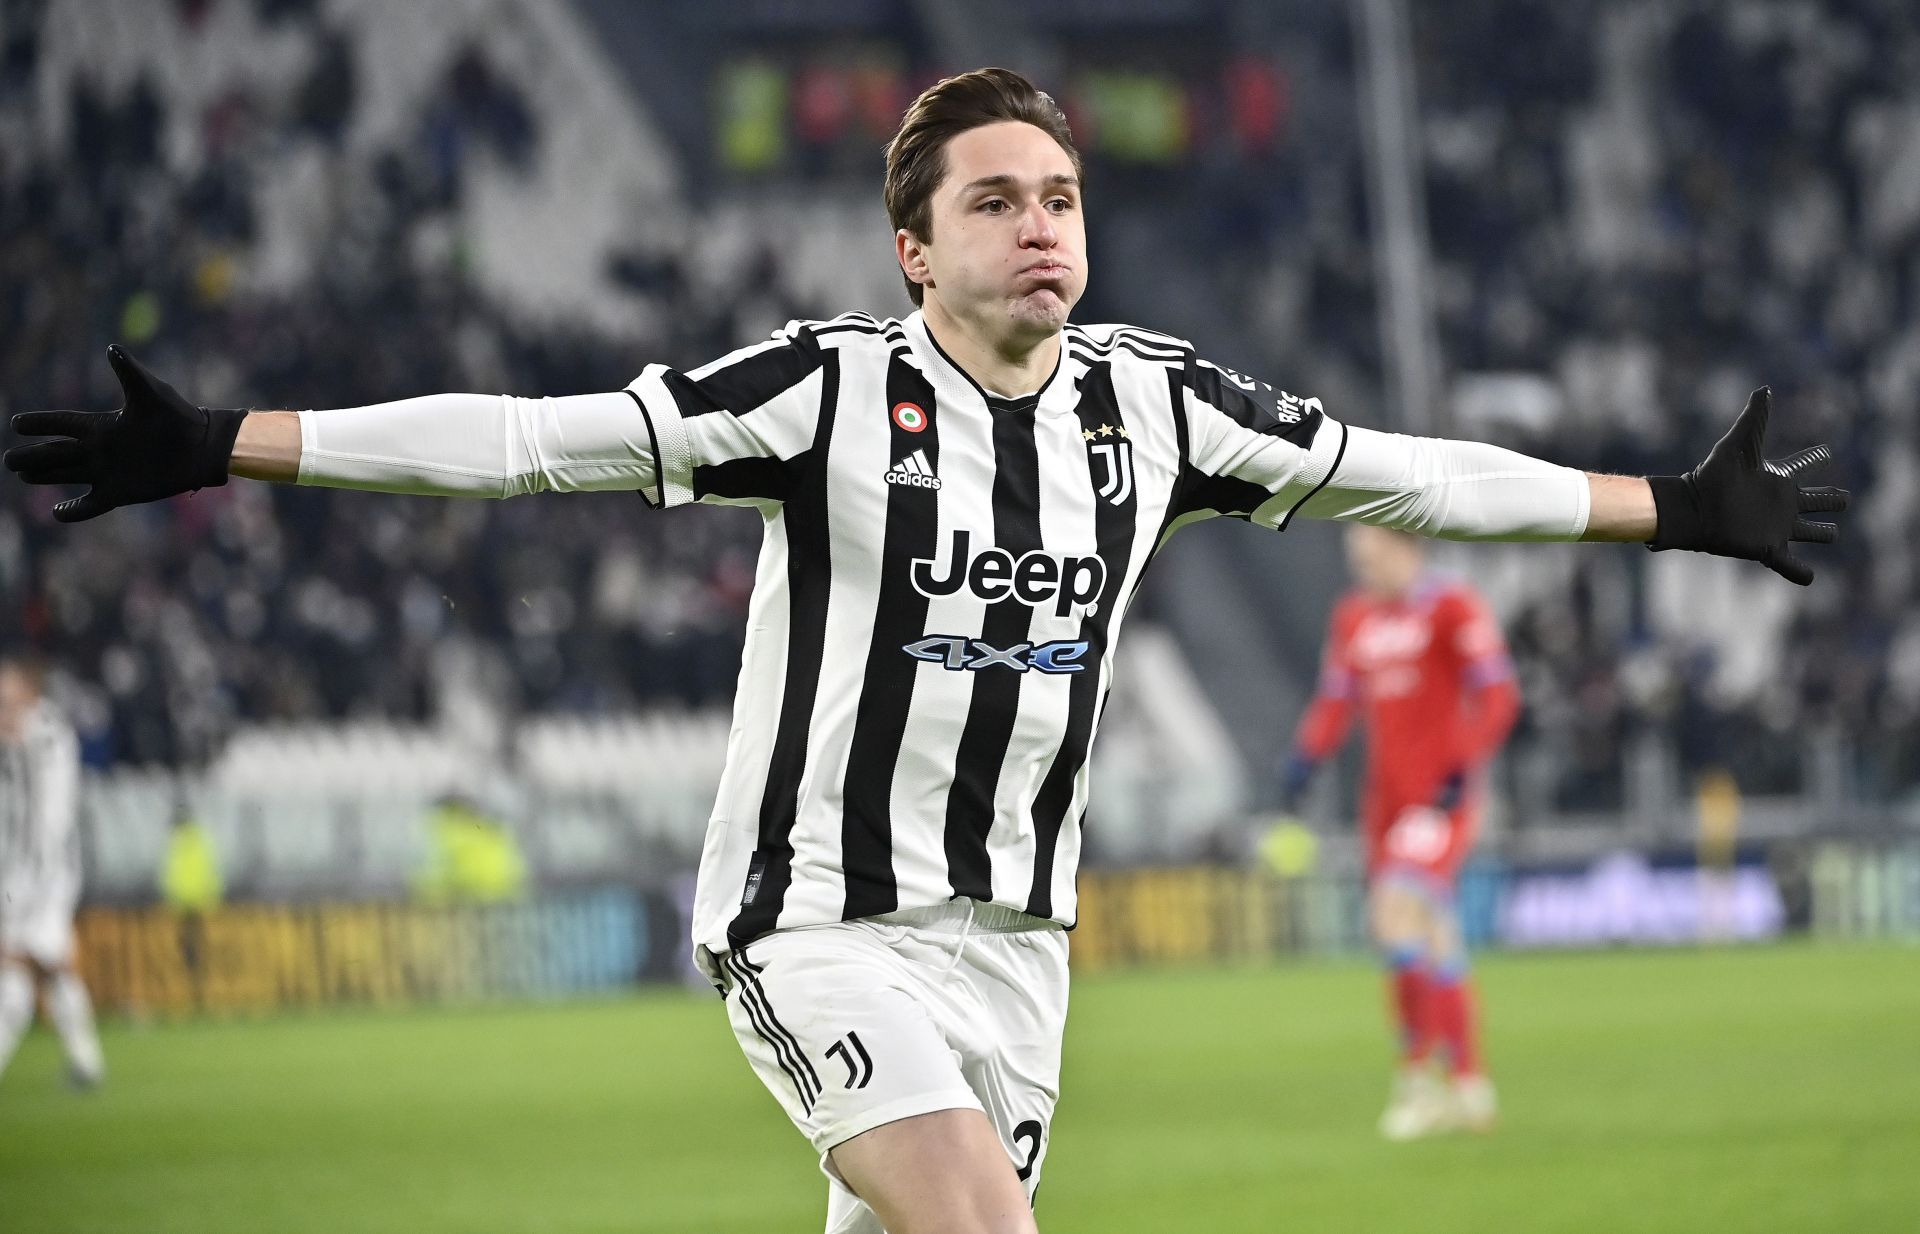 Federico Chiesa is one of the most valuable players at Juventus